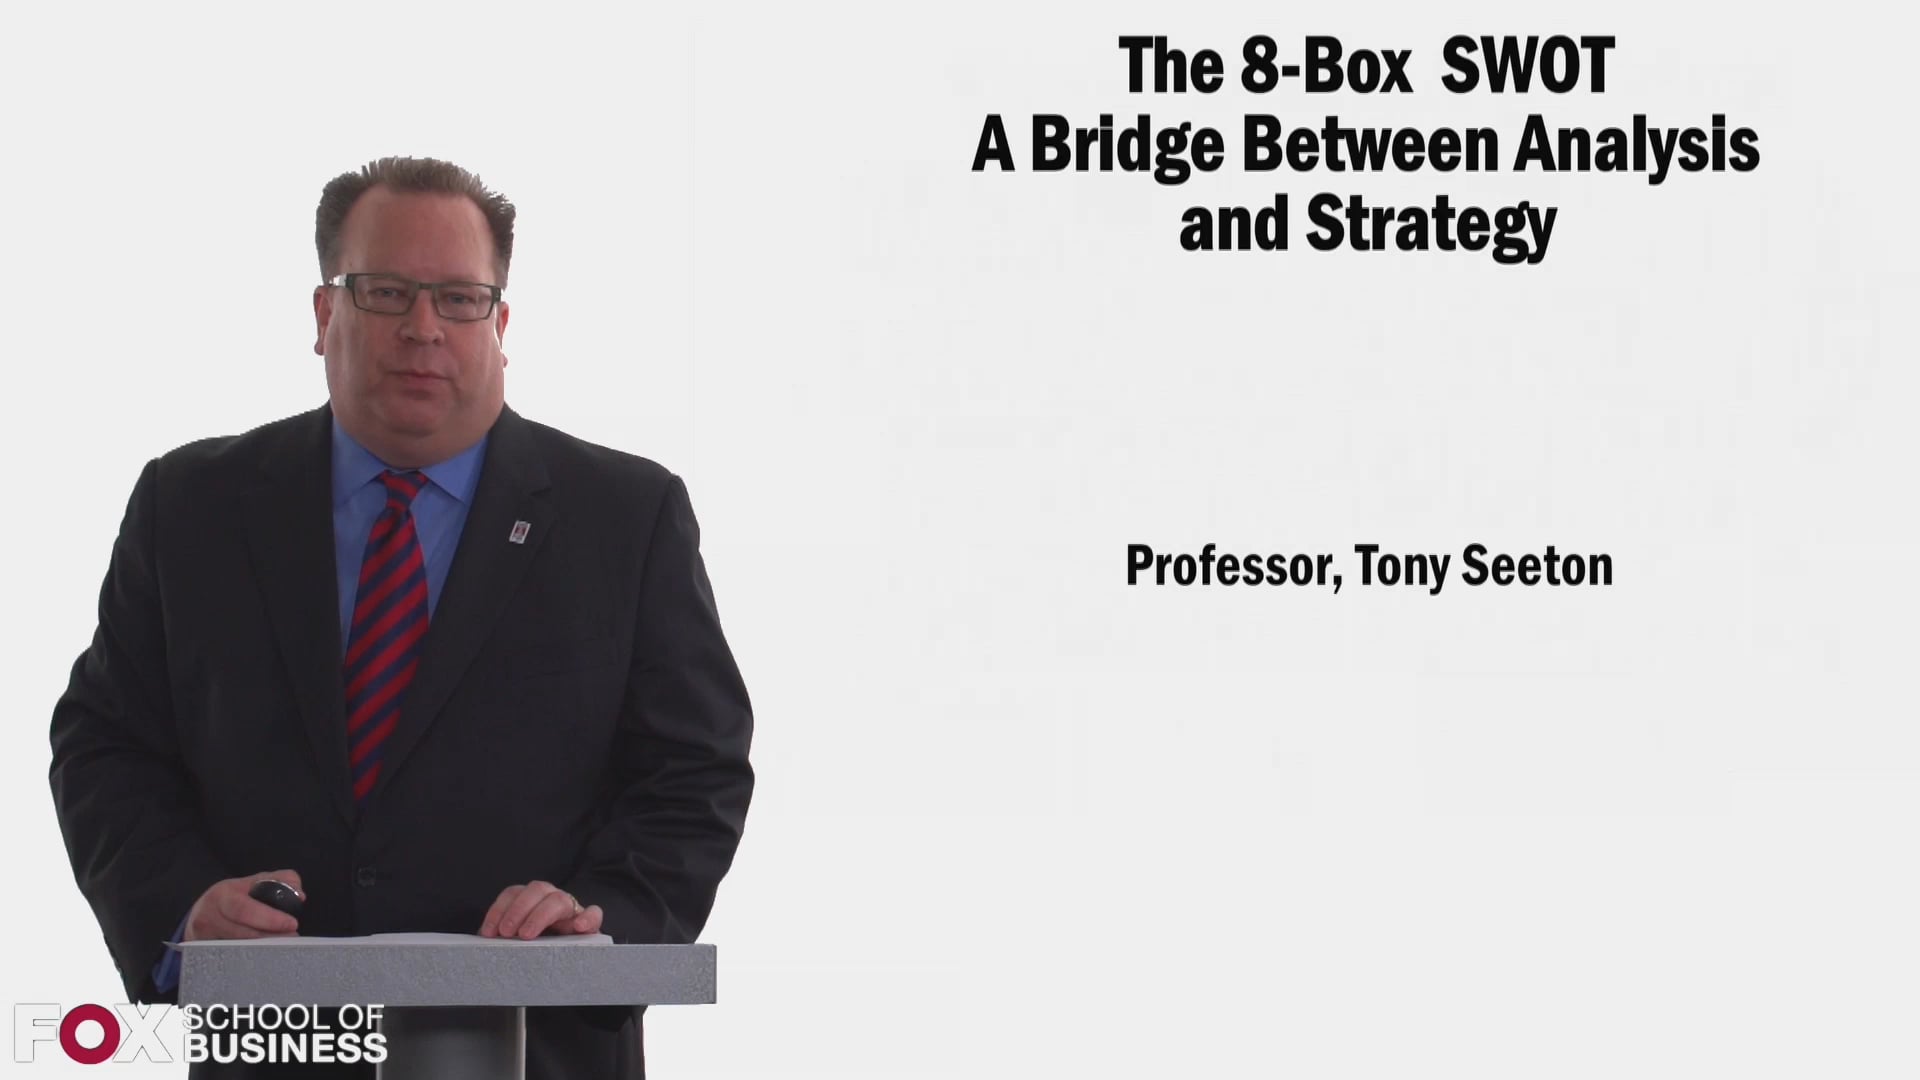 The 8-Box SWOT A Bridge Between Analysis and Strategy